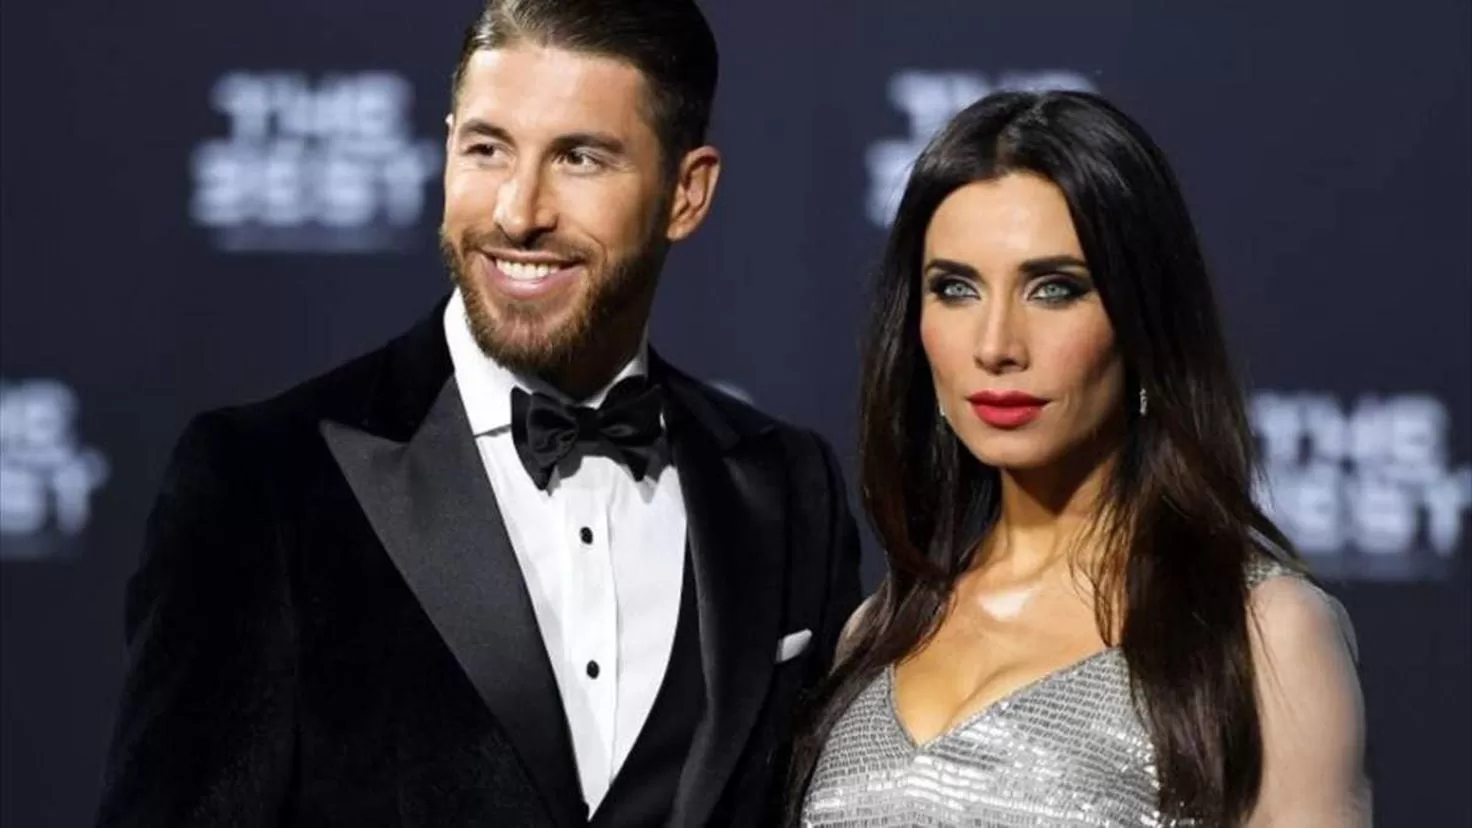 Pilar Rubio and Sergio Ramos reappear together and silence the Christmas rumors
